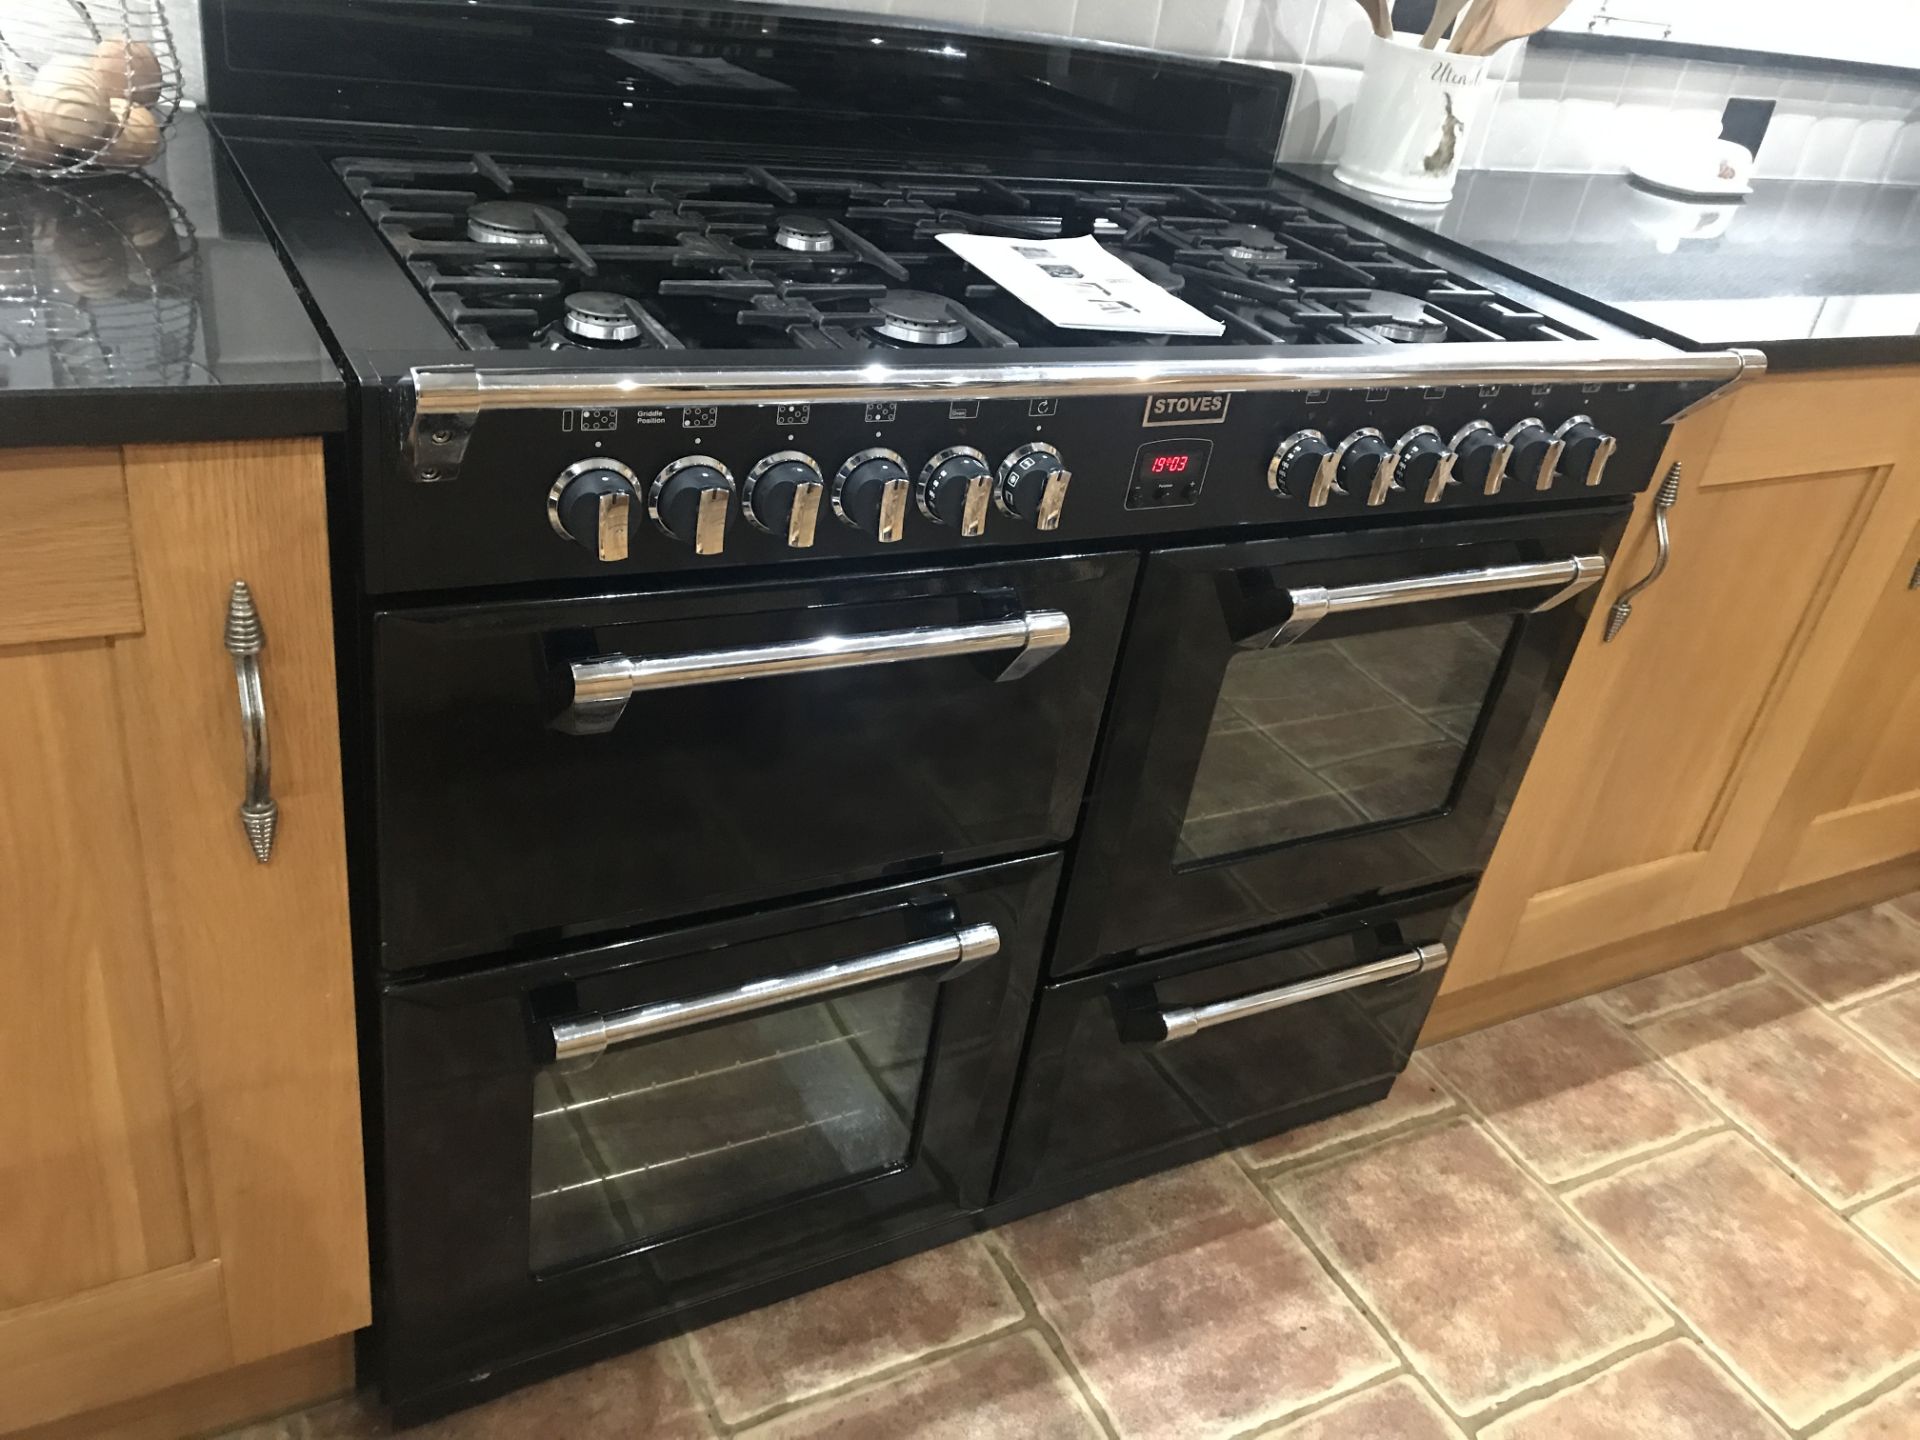 1 x Stoves Richmond 1100DF Dual Fuel Range Cooker With Matching Extractor Hood - Black Finish With 4 - Image 2 of 18